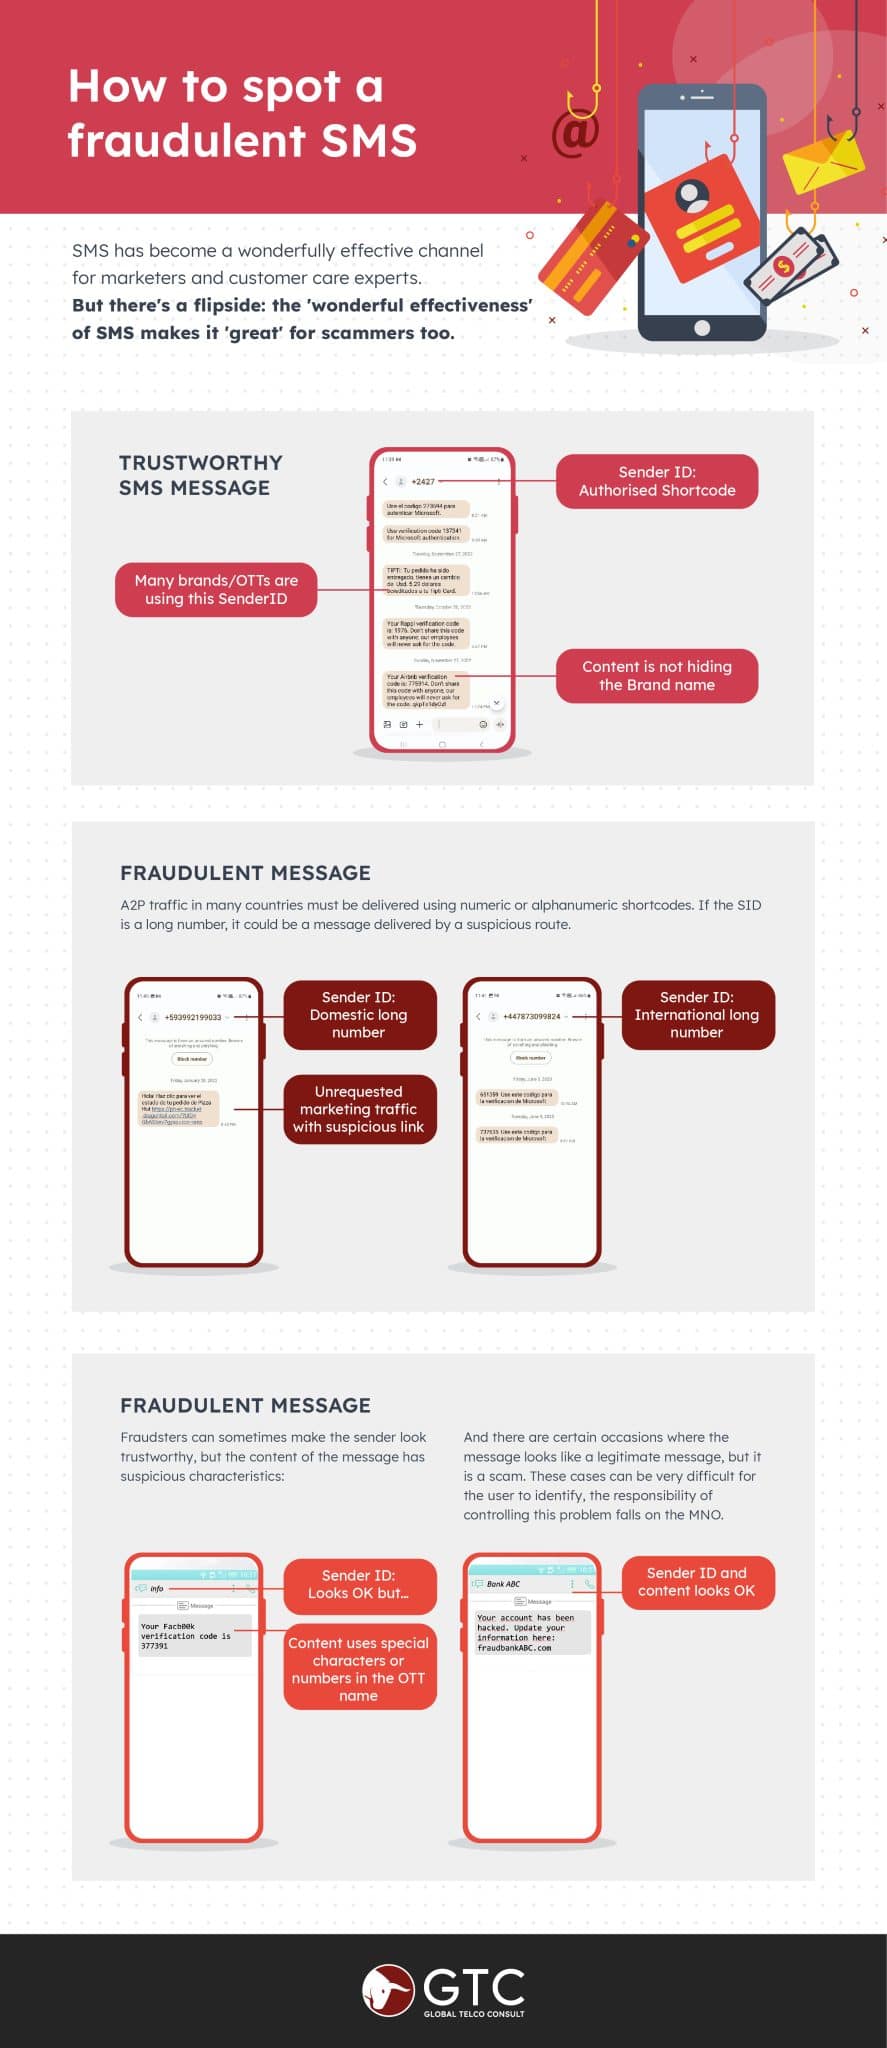 GTC_Infographic_FraudulentSMS